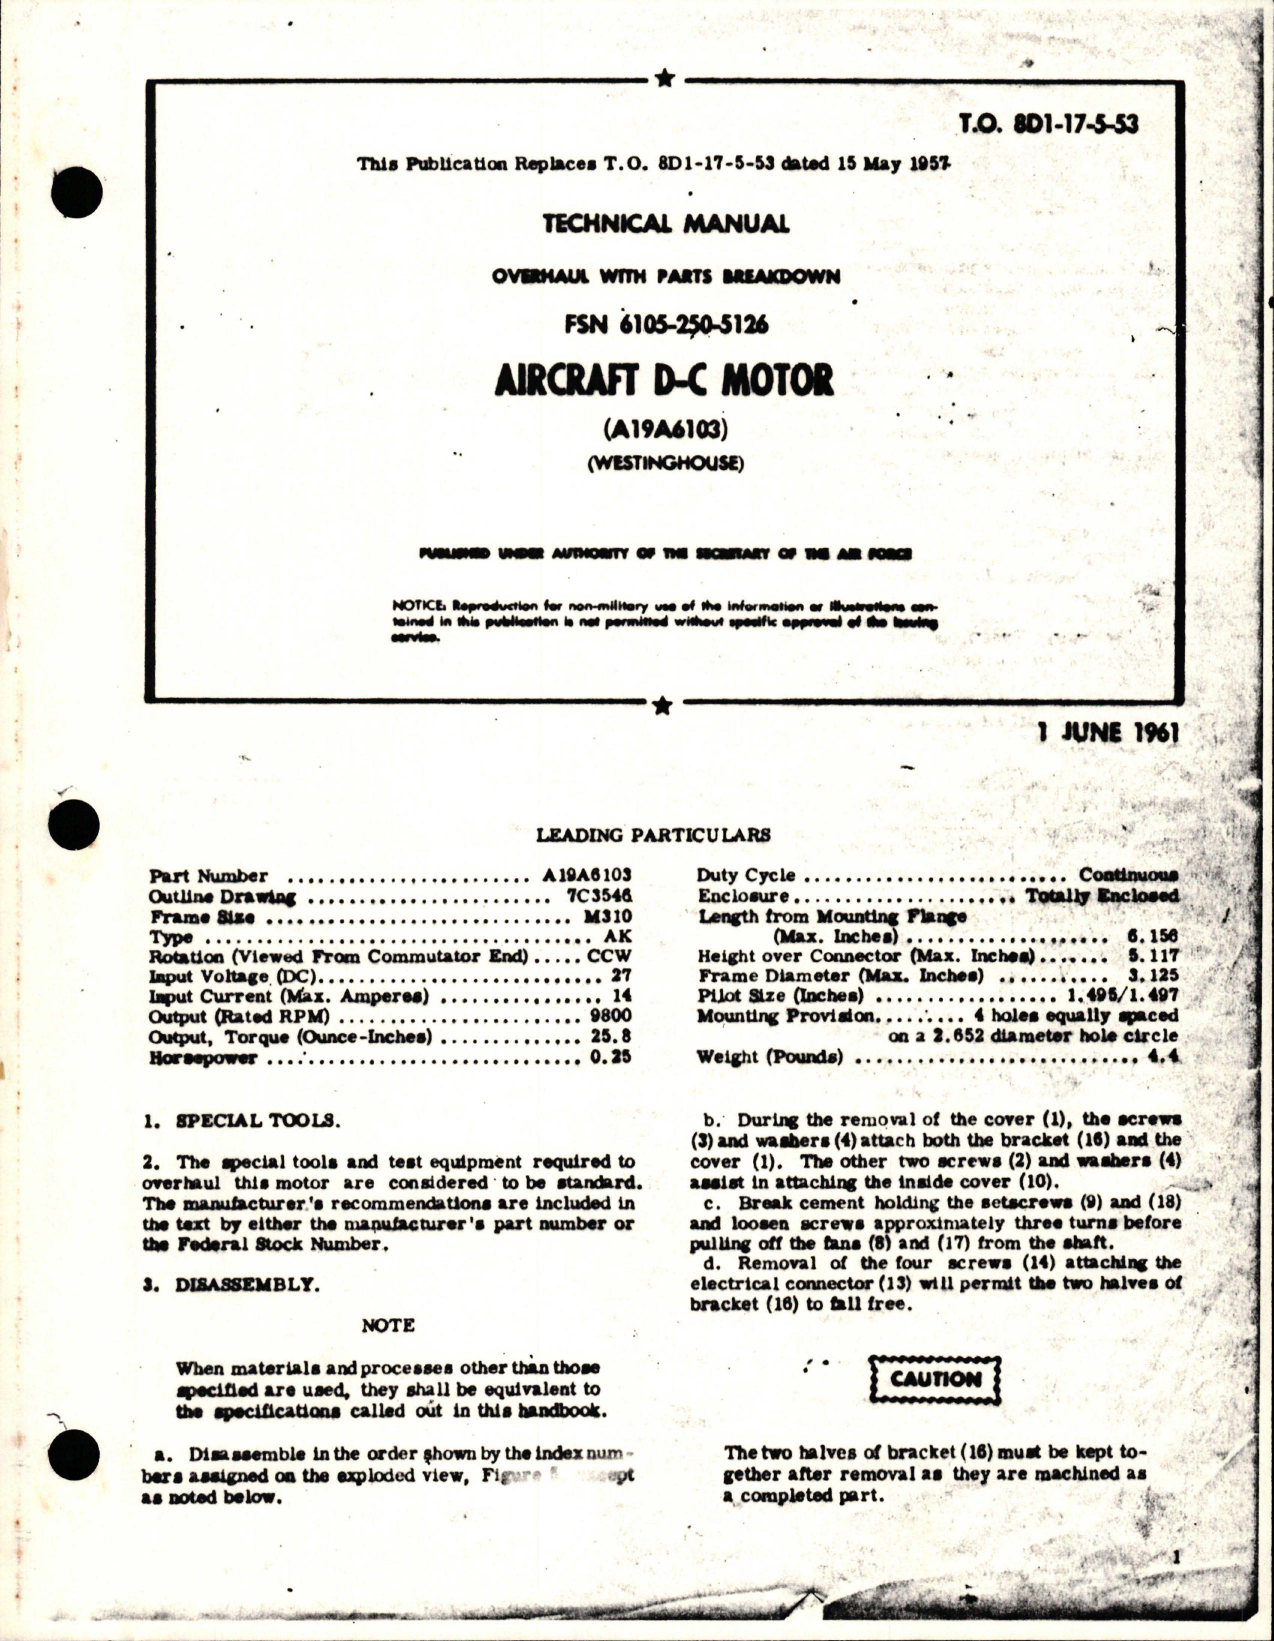 Sample page 1 from AirCorps Library document: Overhaul with Parts Breakdown for D-C Motor - A19A6103 